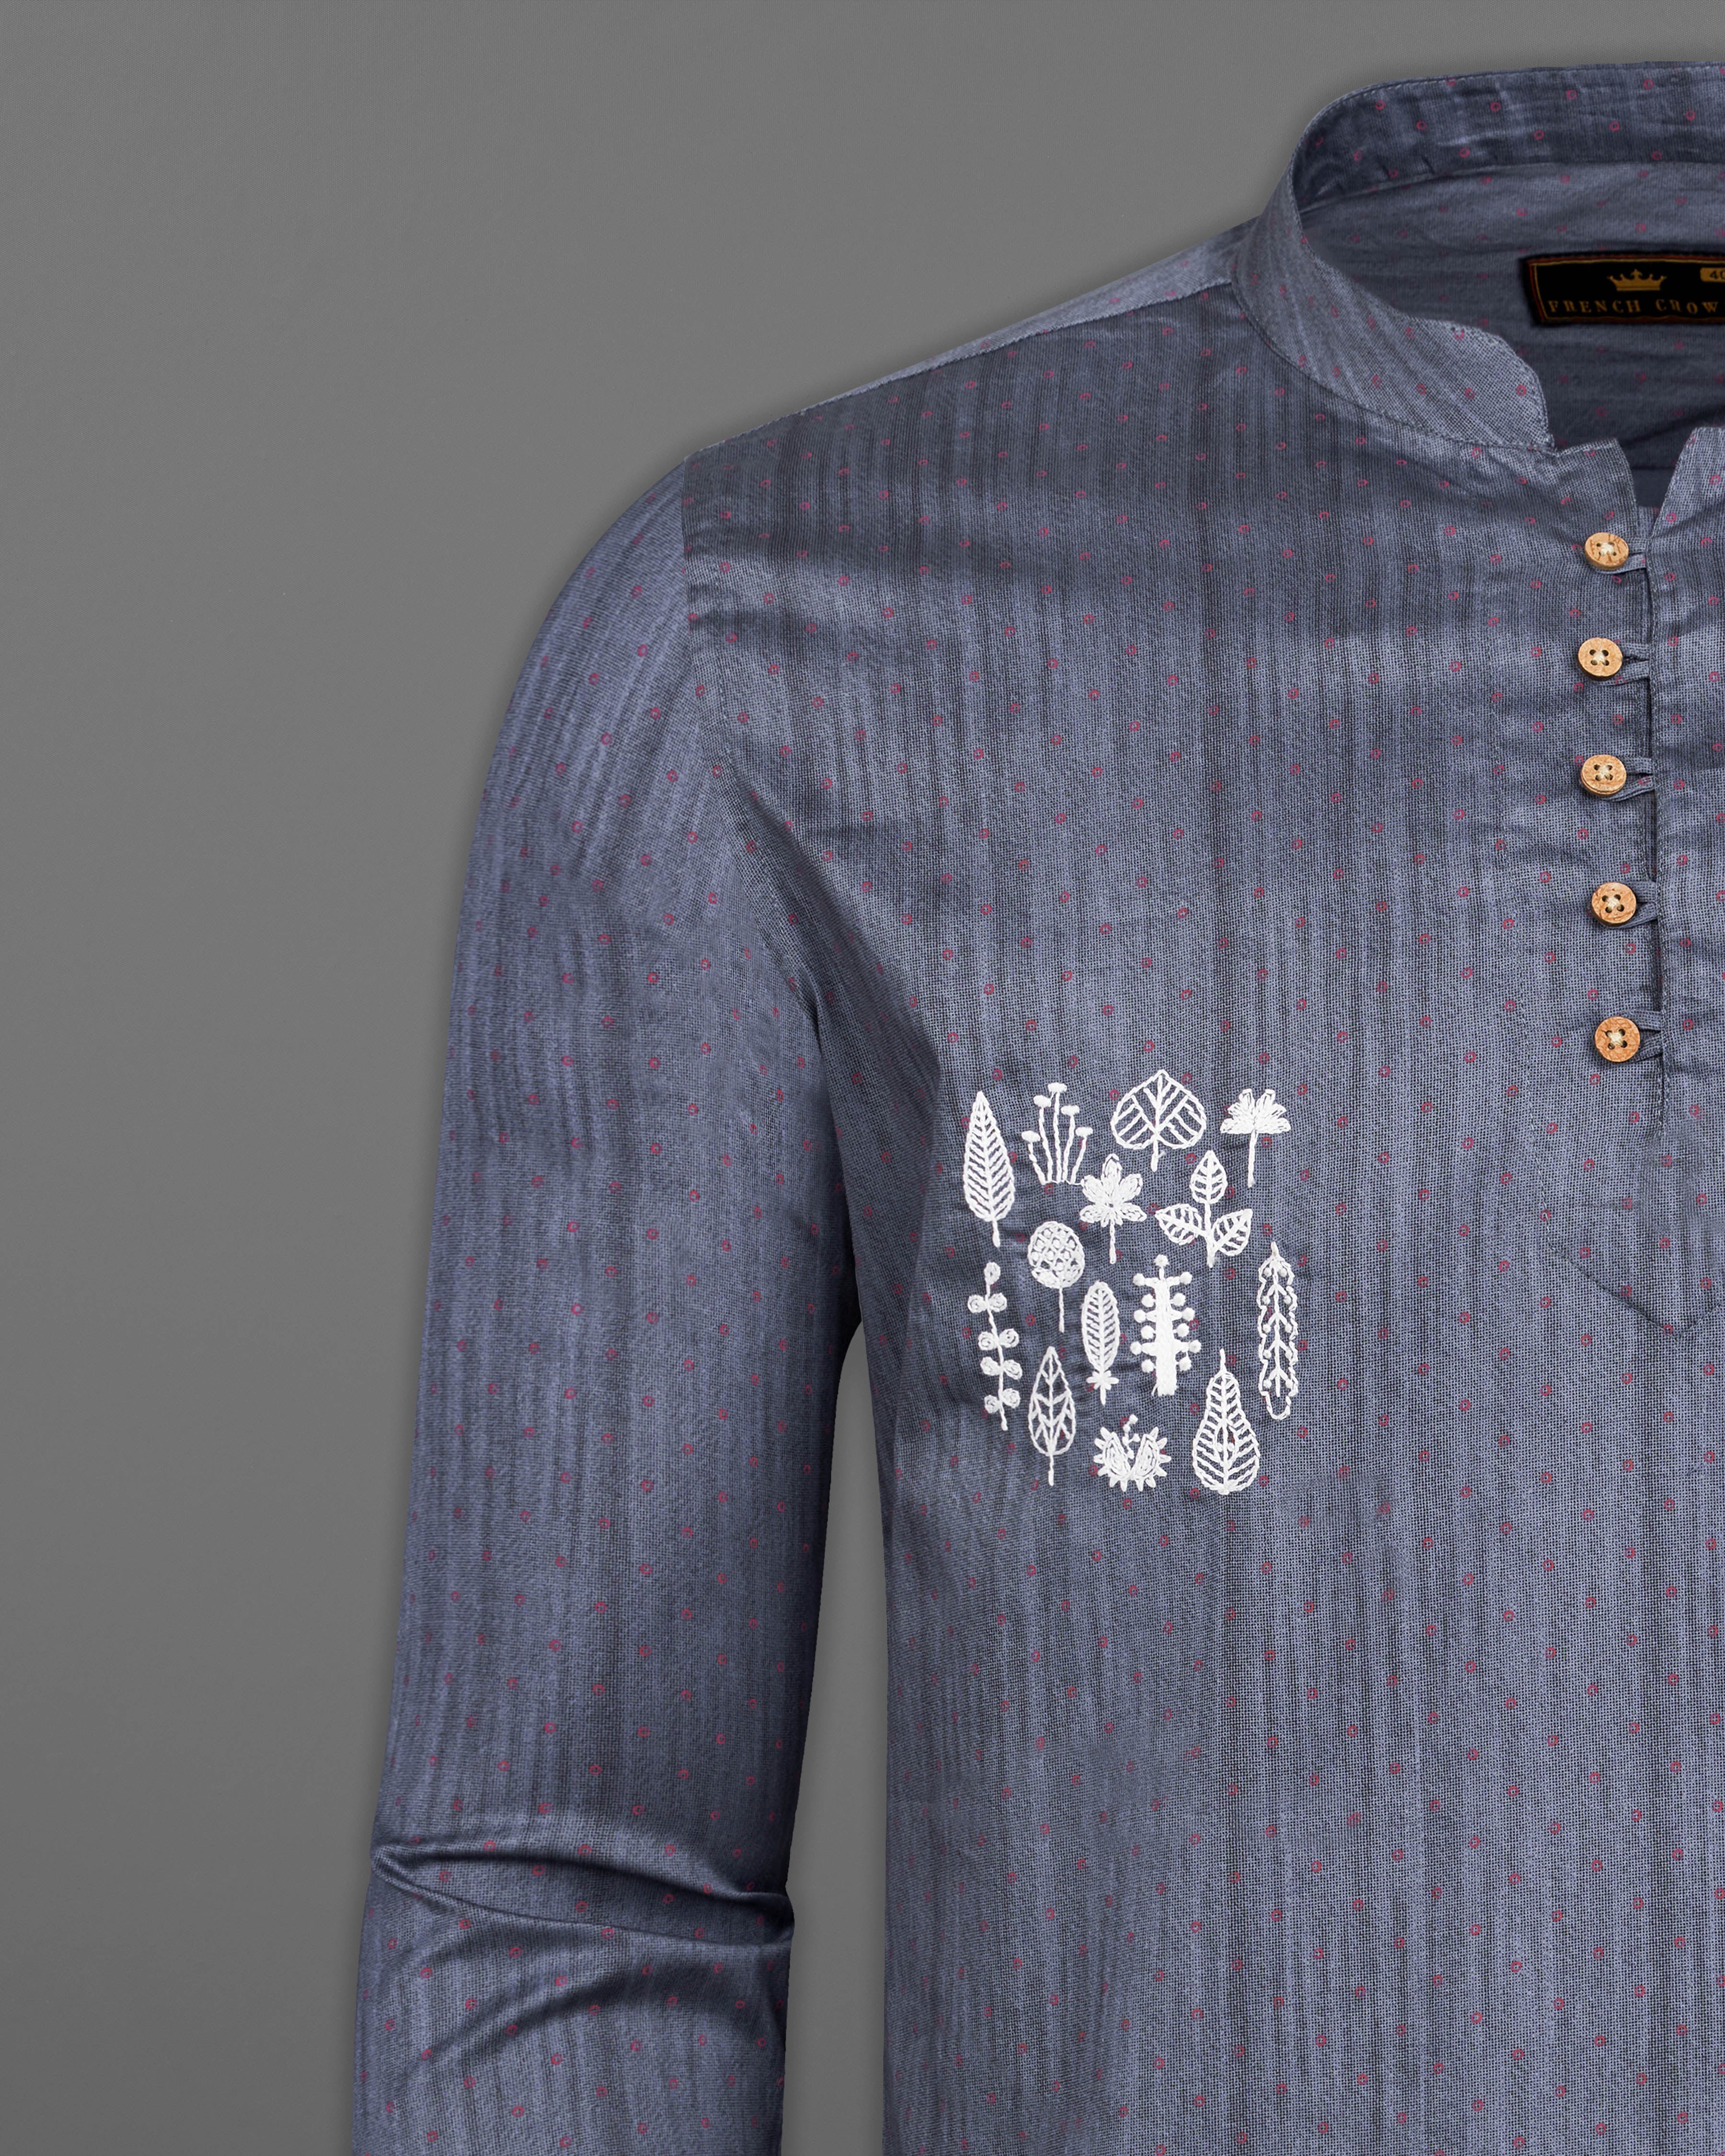 Cadet Gray with White Emroidered Luxurious Linen Kurta Designer Shirt 6281-KS-E059-38, 6281-KS-E059-H-38, 6281-KS-E059-39, 6281-KS-E059-H-39, 6281-KS-E059-40, 6281-KS-E059-H-40, 6281-KS-E059-42, 6281-KS-E059-H-42, 6281-KS-E059-44, 6281-KS-E059-H-44, 6281-KS-E059-46, 6281-KS-E059-H-46, 6281-KS-E059-48, 6281-KS-E059-H-48, 6281-KS-E059-50, 6281-KS-E059-H-50, 6281-KS-E059-52, 6281-KS-E059-H-52